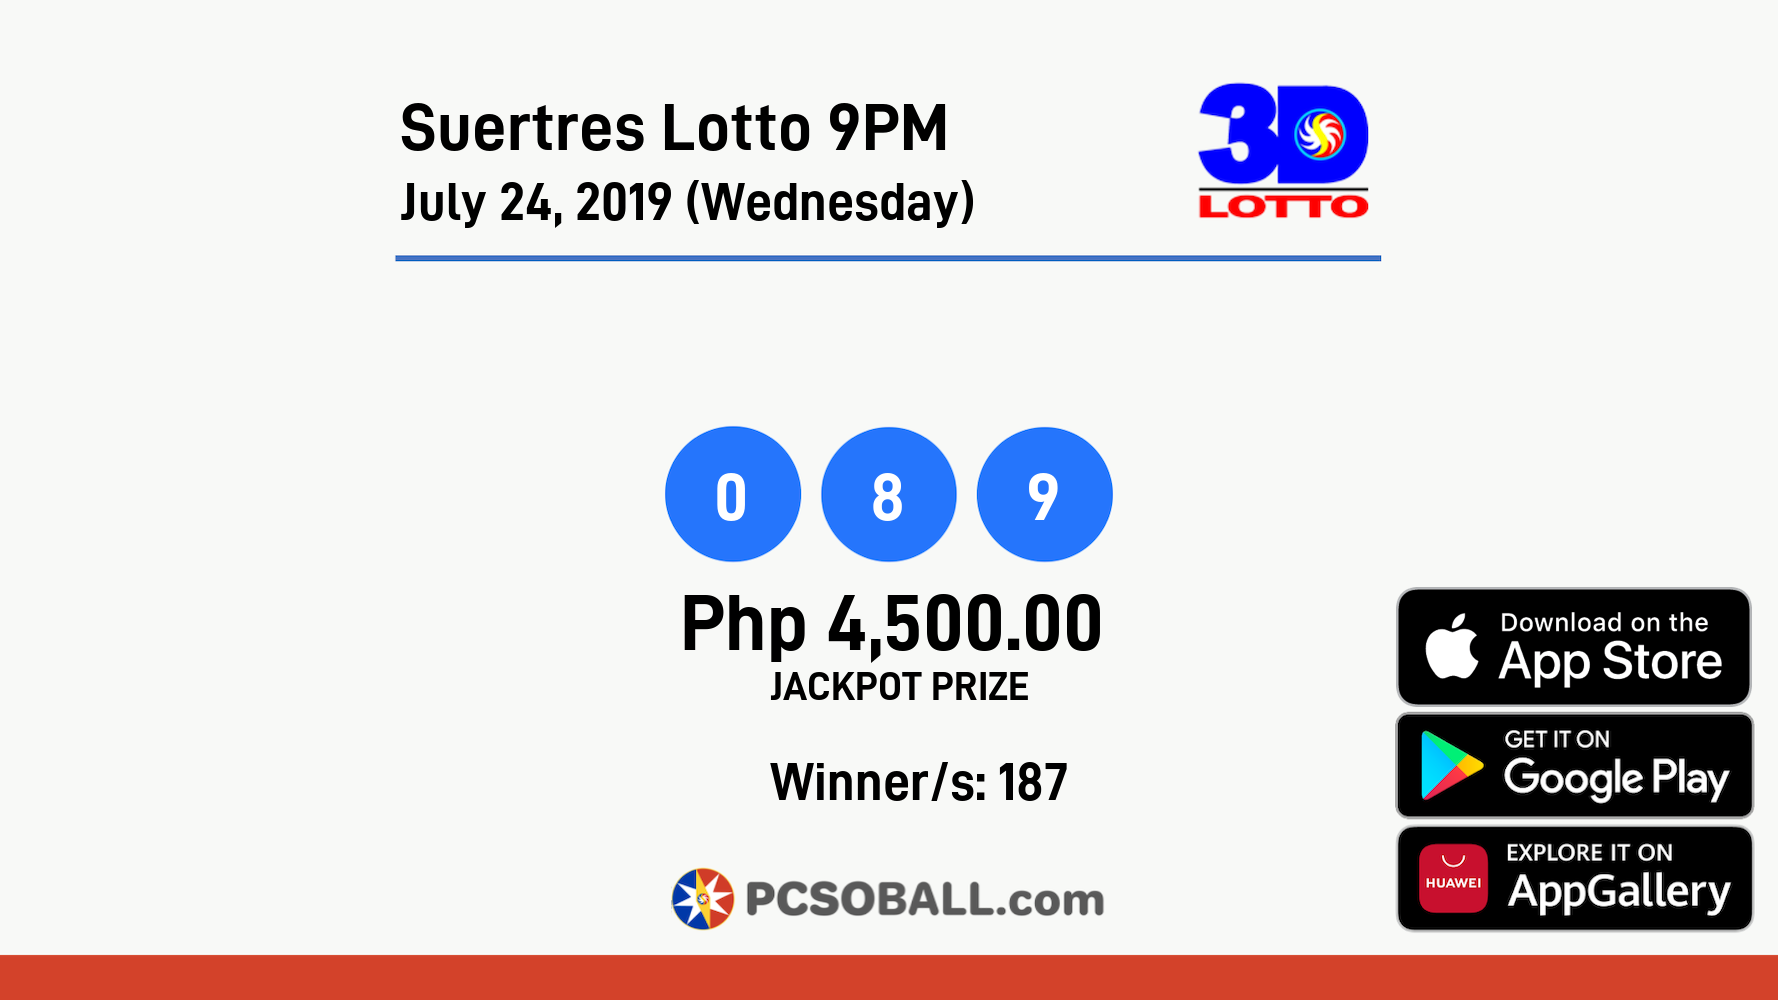 Suertres Lotto 9PM July 24, 2019 (Wednesday) Result